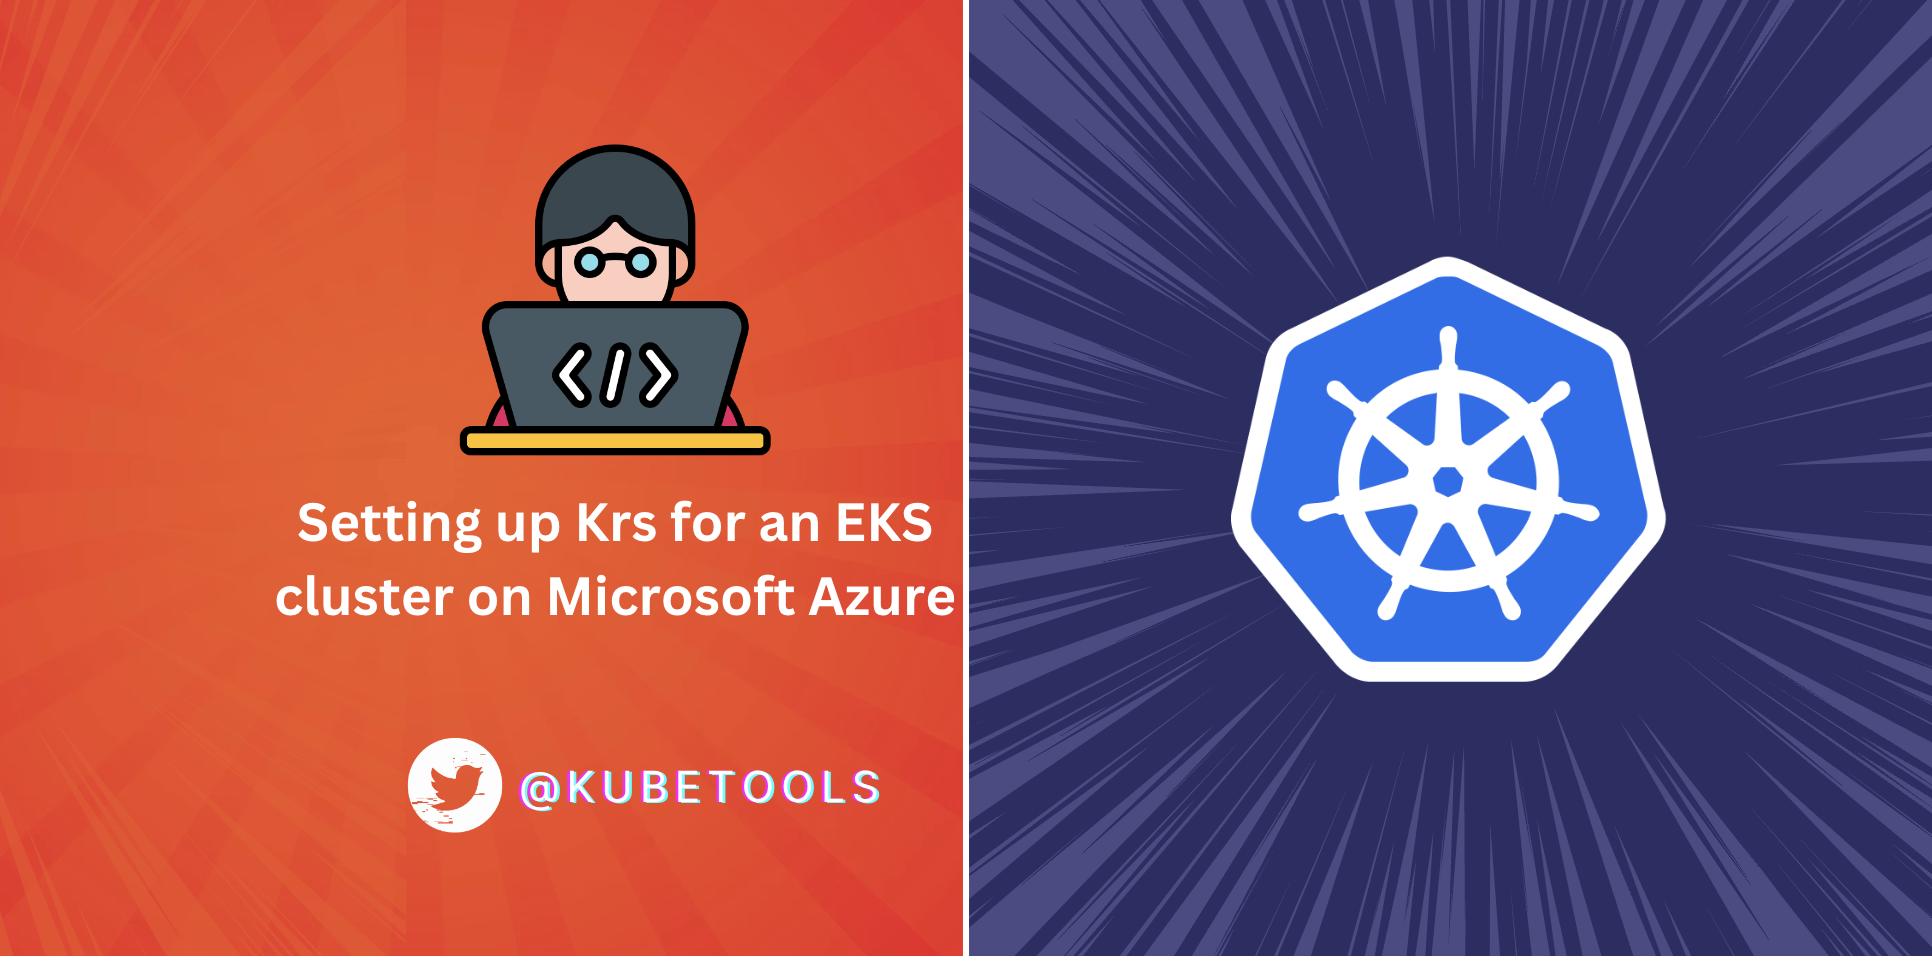 Setting up Krs for an EKS cluster on Microsoft Azure